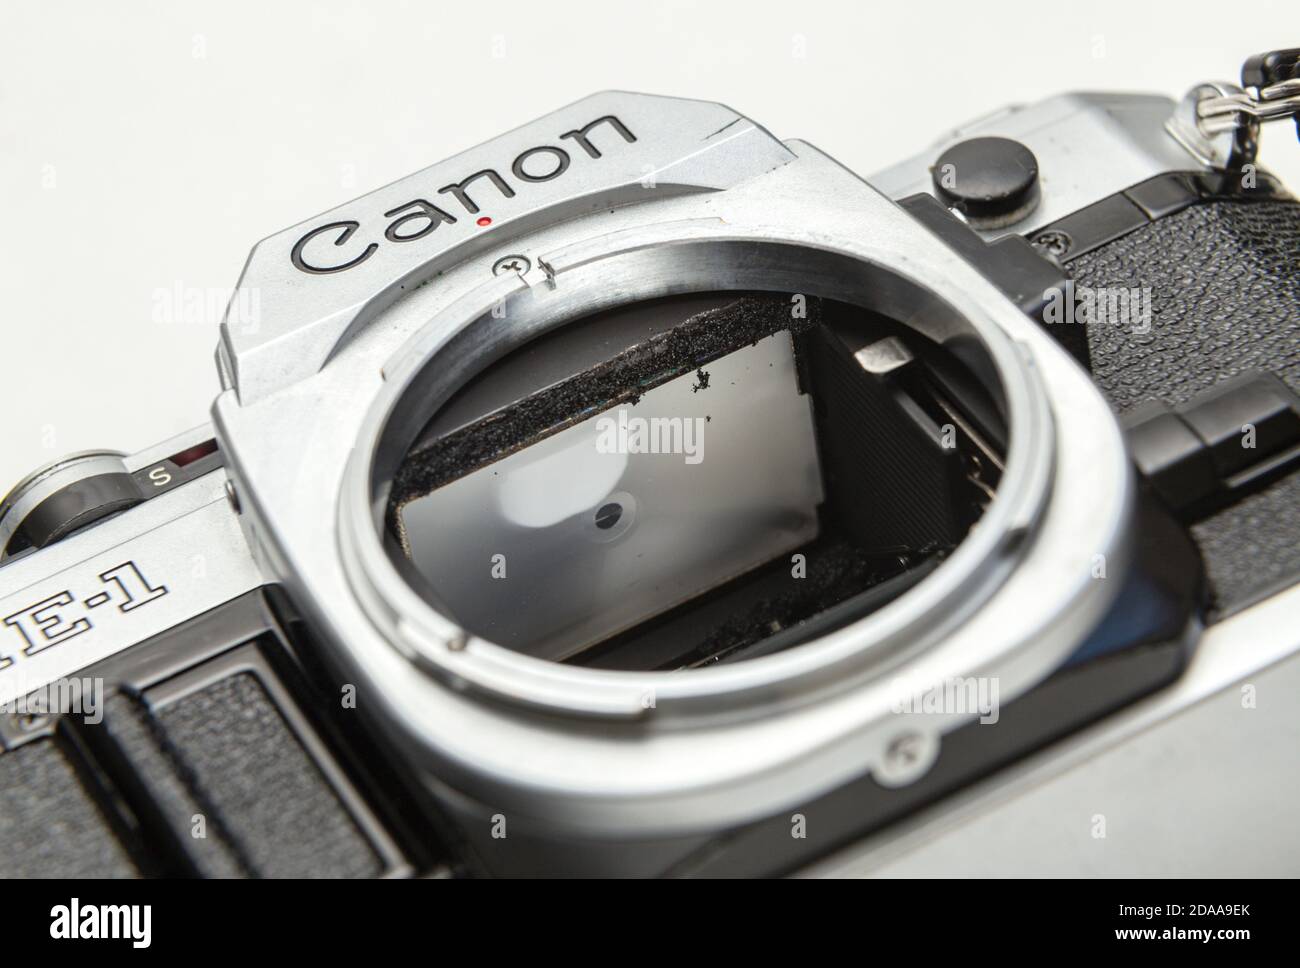 Foam mirror buffers disintegrating on a Canon AE1 SLR film camera,1978 model, old and dusty condition. Stock Photo